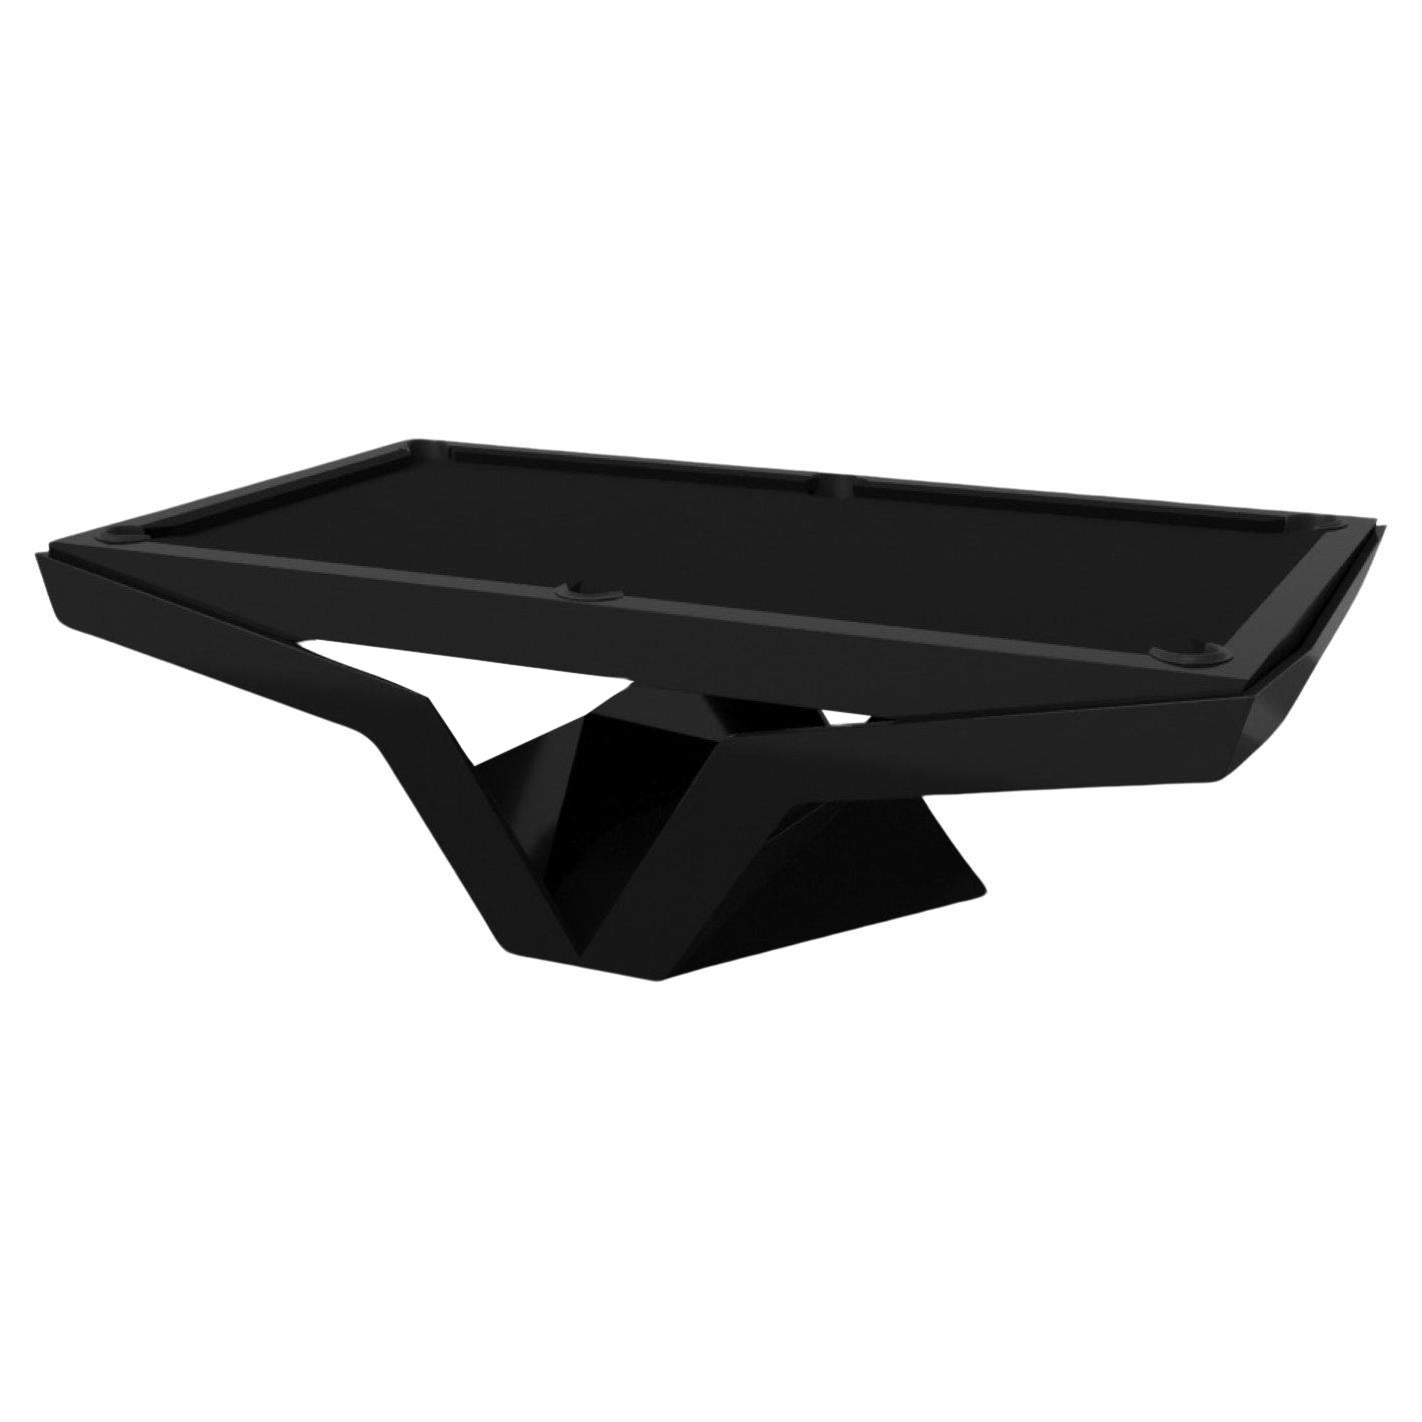 Elevate Customs Enzo Pool Table / Solid Pantone Black Color in 8.5' -Made in USA